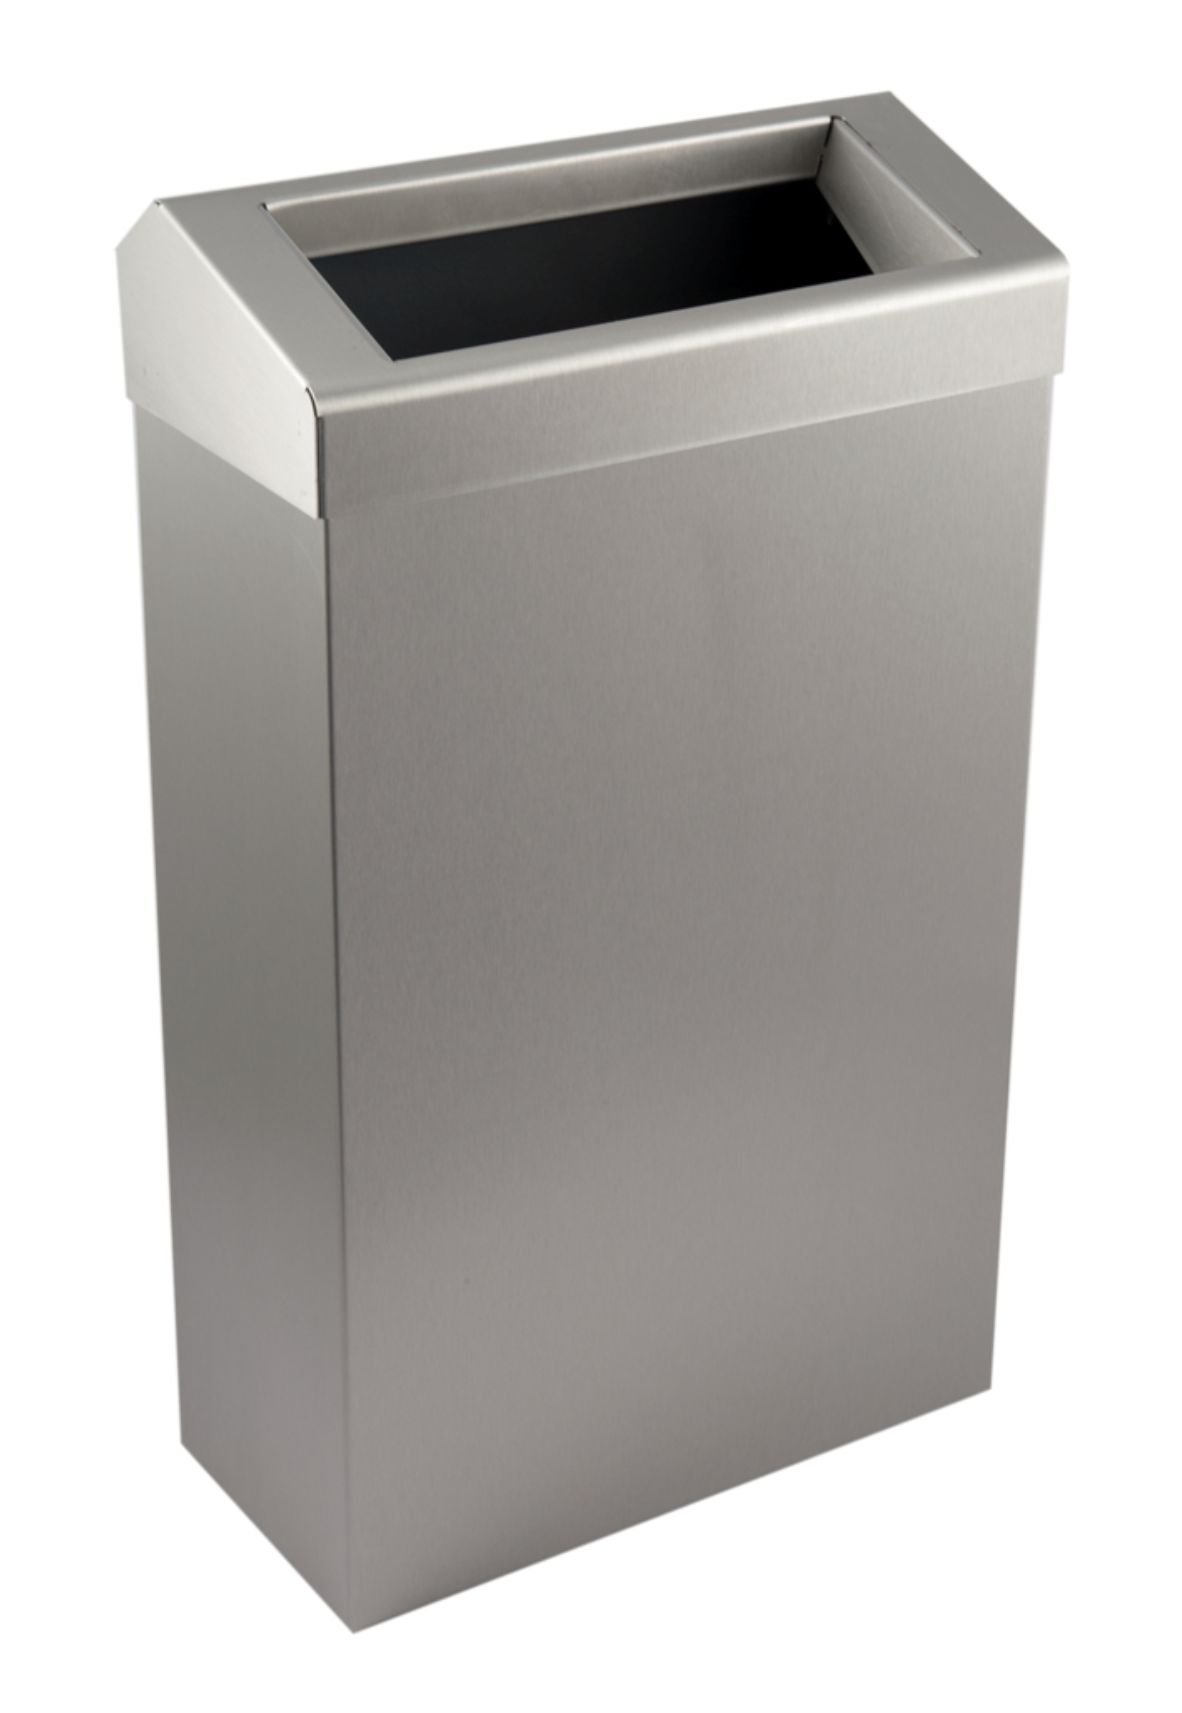 Waste Bin 30ltr Chute Style Brushed Stainless Steel (70SS)